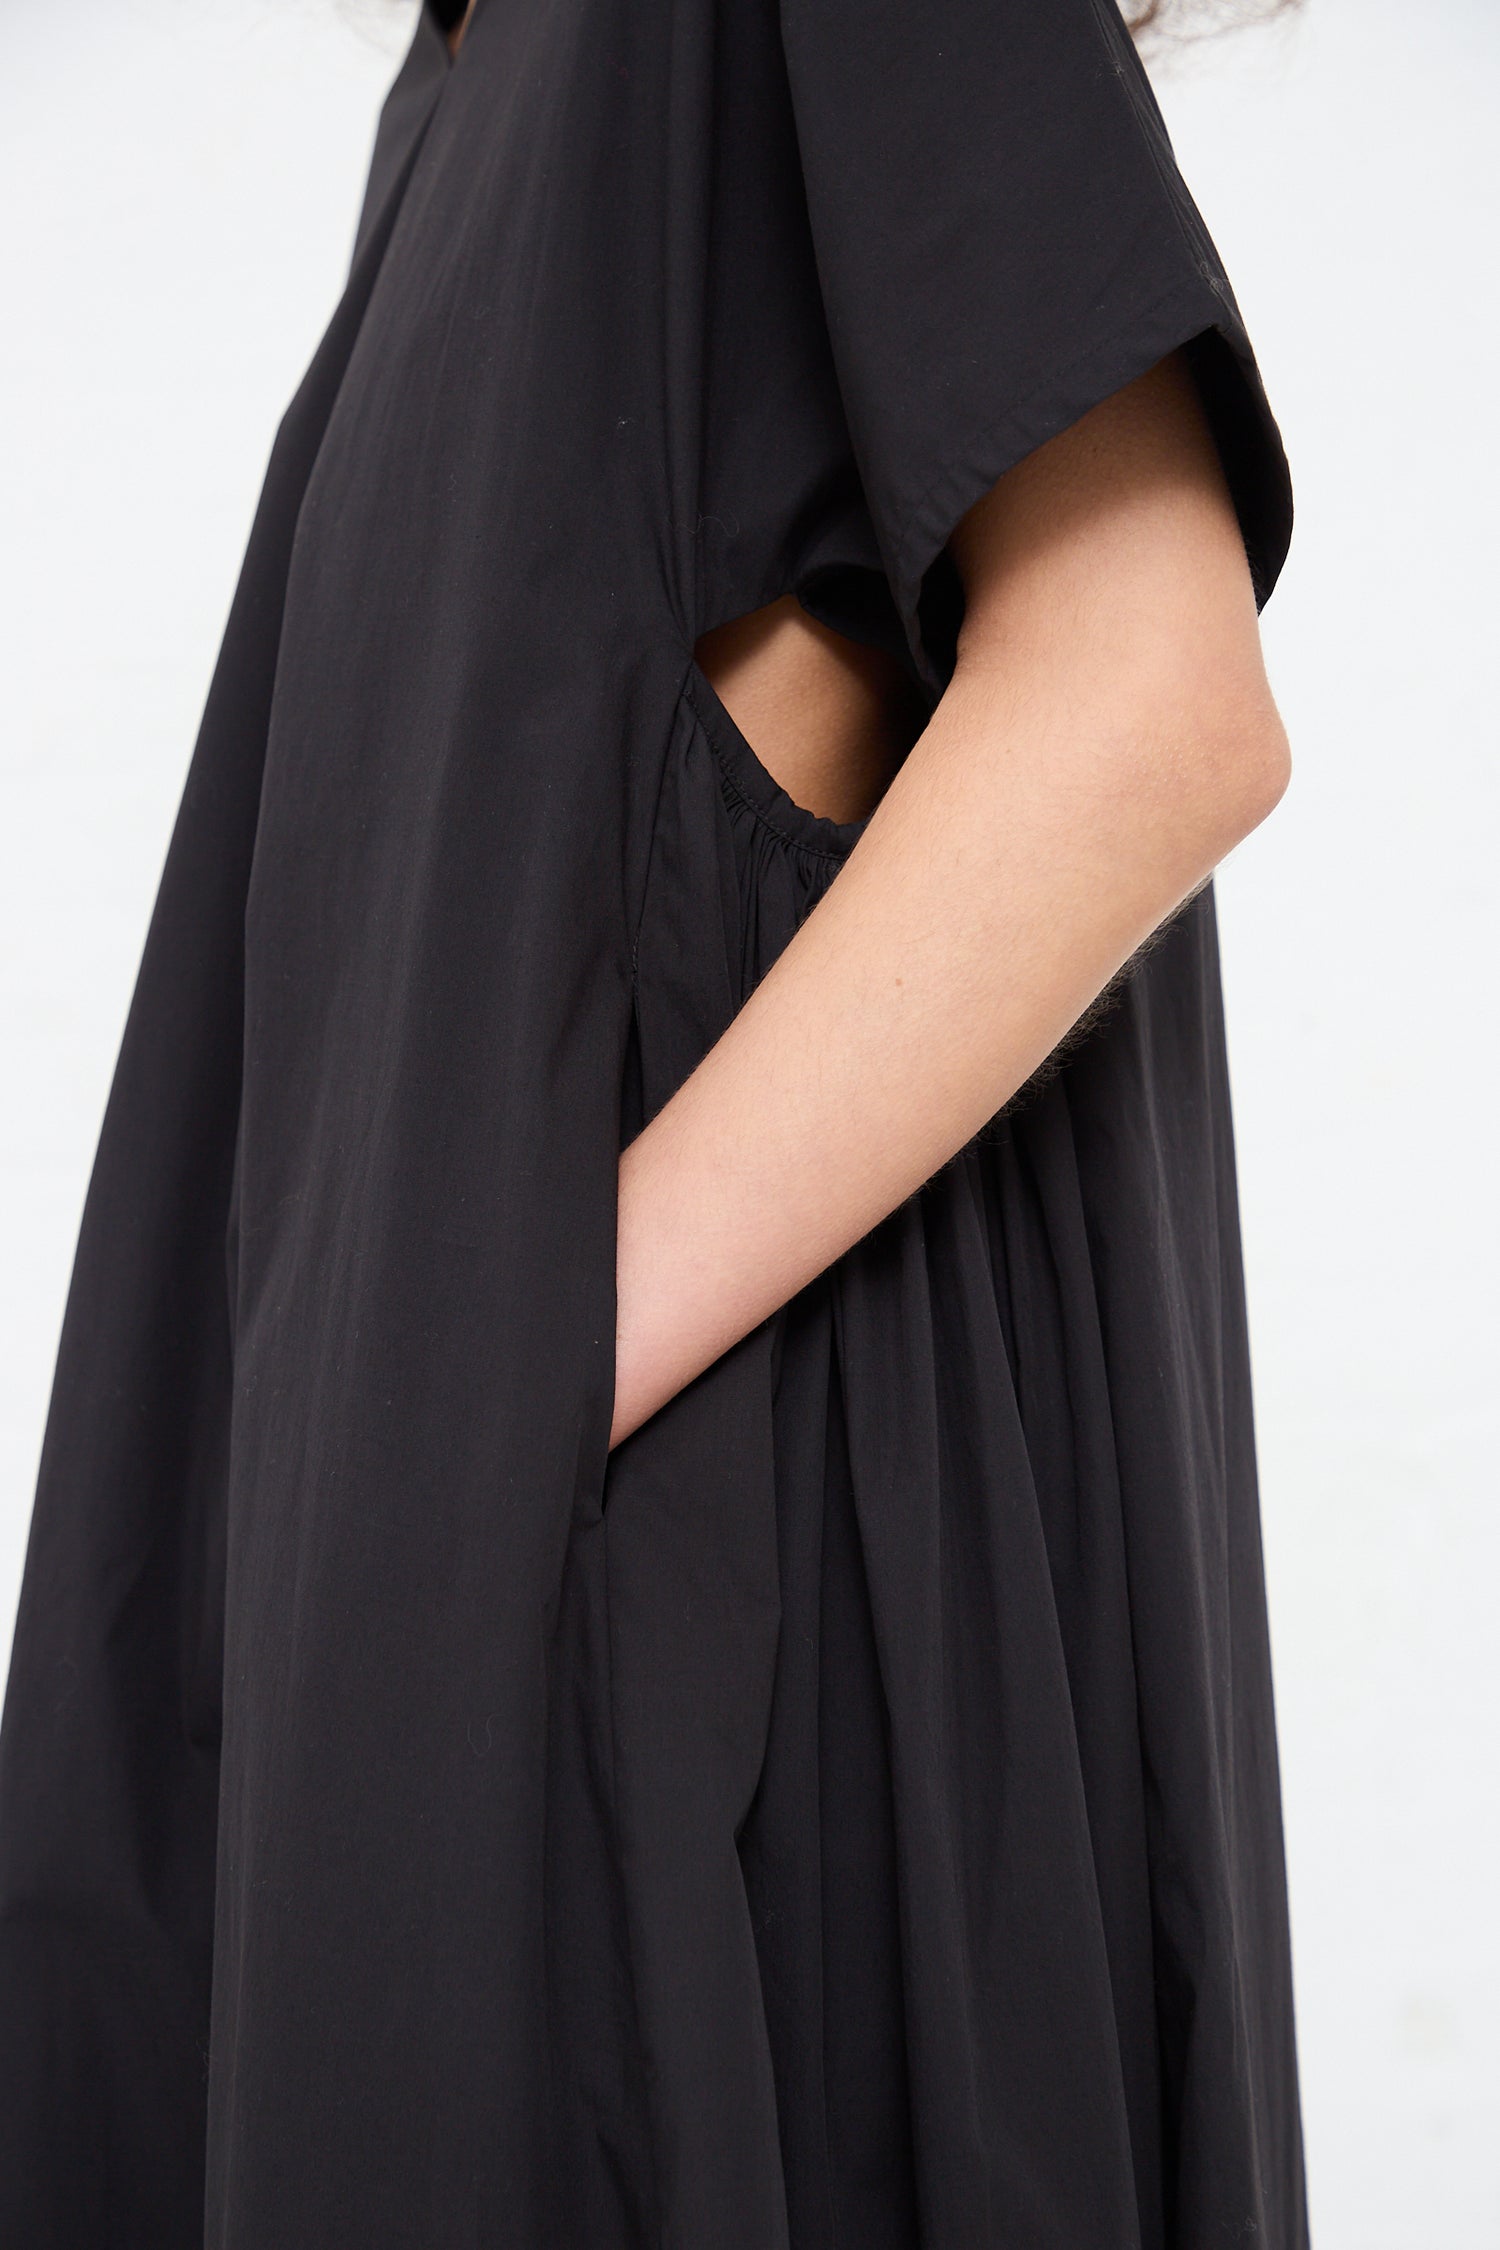 A detail of a person's arm wrapped in a draped Black Crane Organic Cotton Star Neck Dress in Black with an open sleeve, showcasing the unique elegance of Los Angeles fashion.